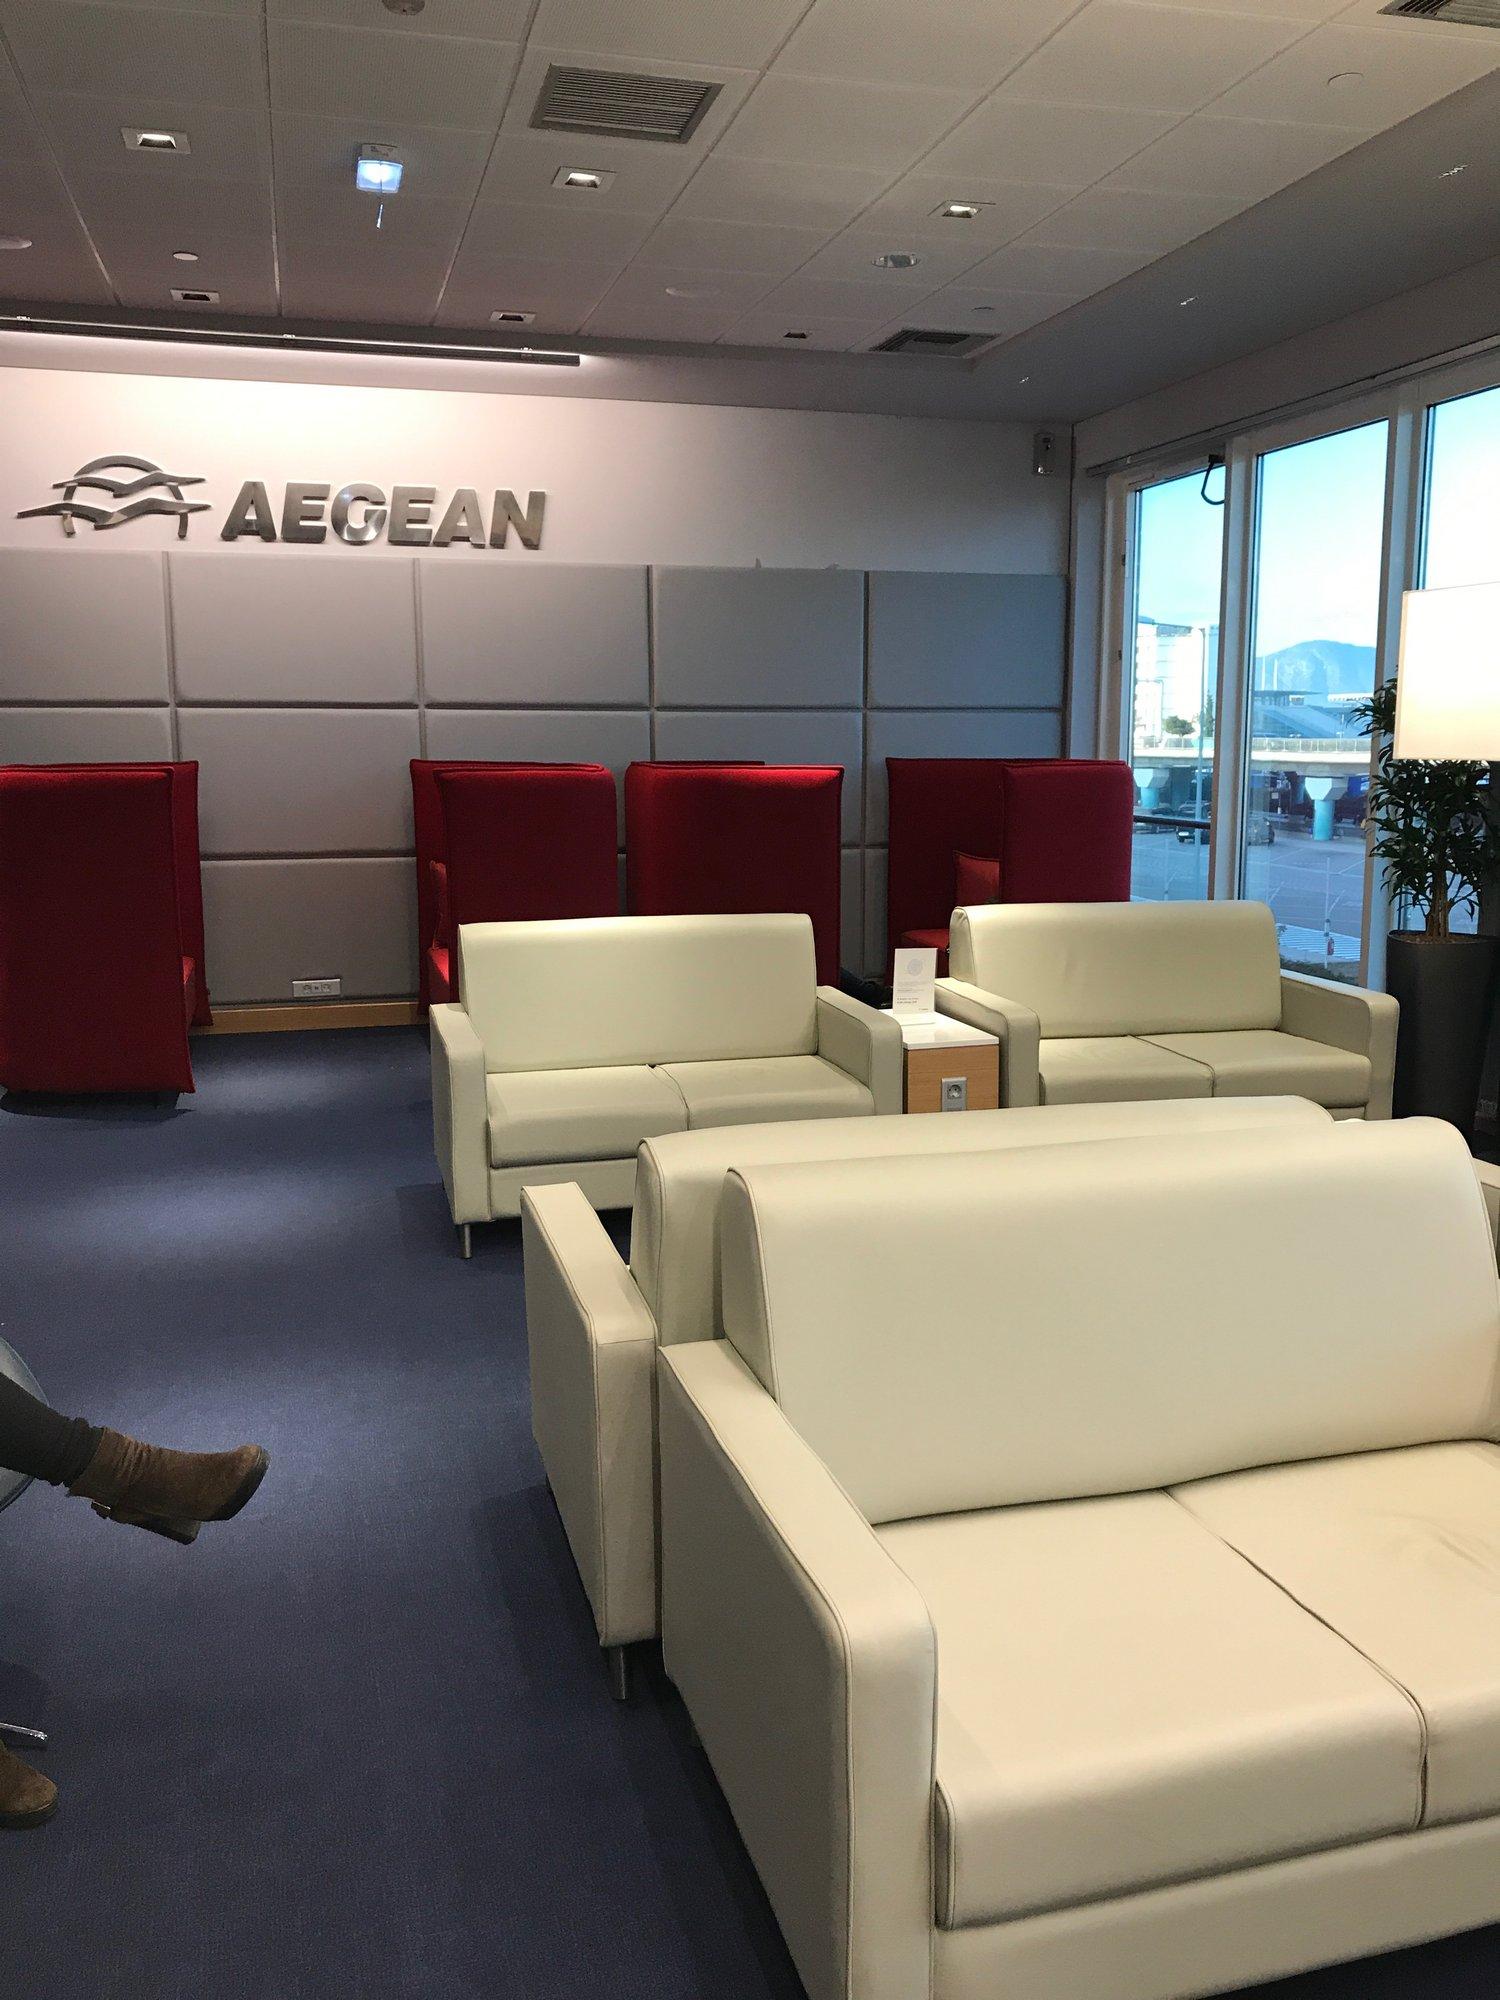 Aegean Business Lounge image 1 of 12